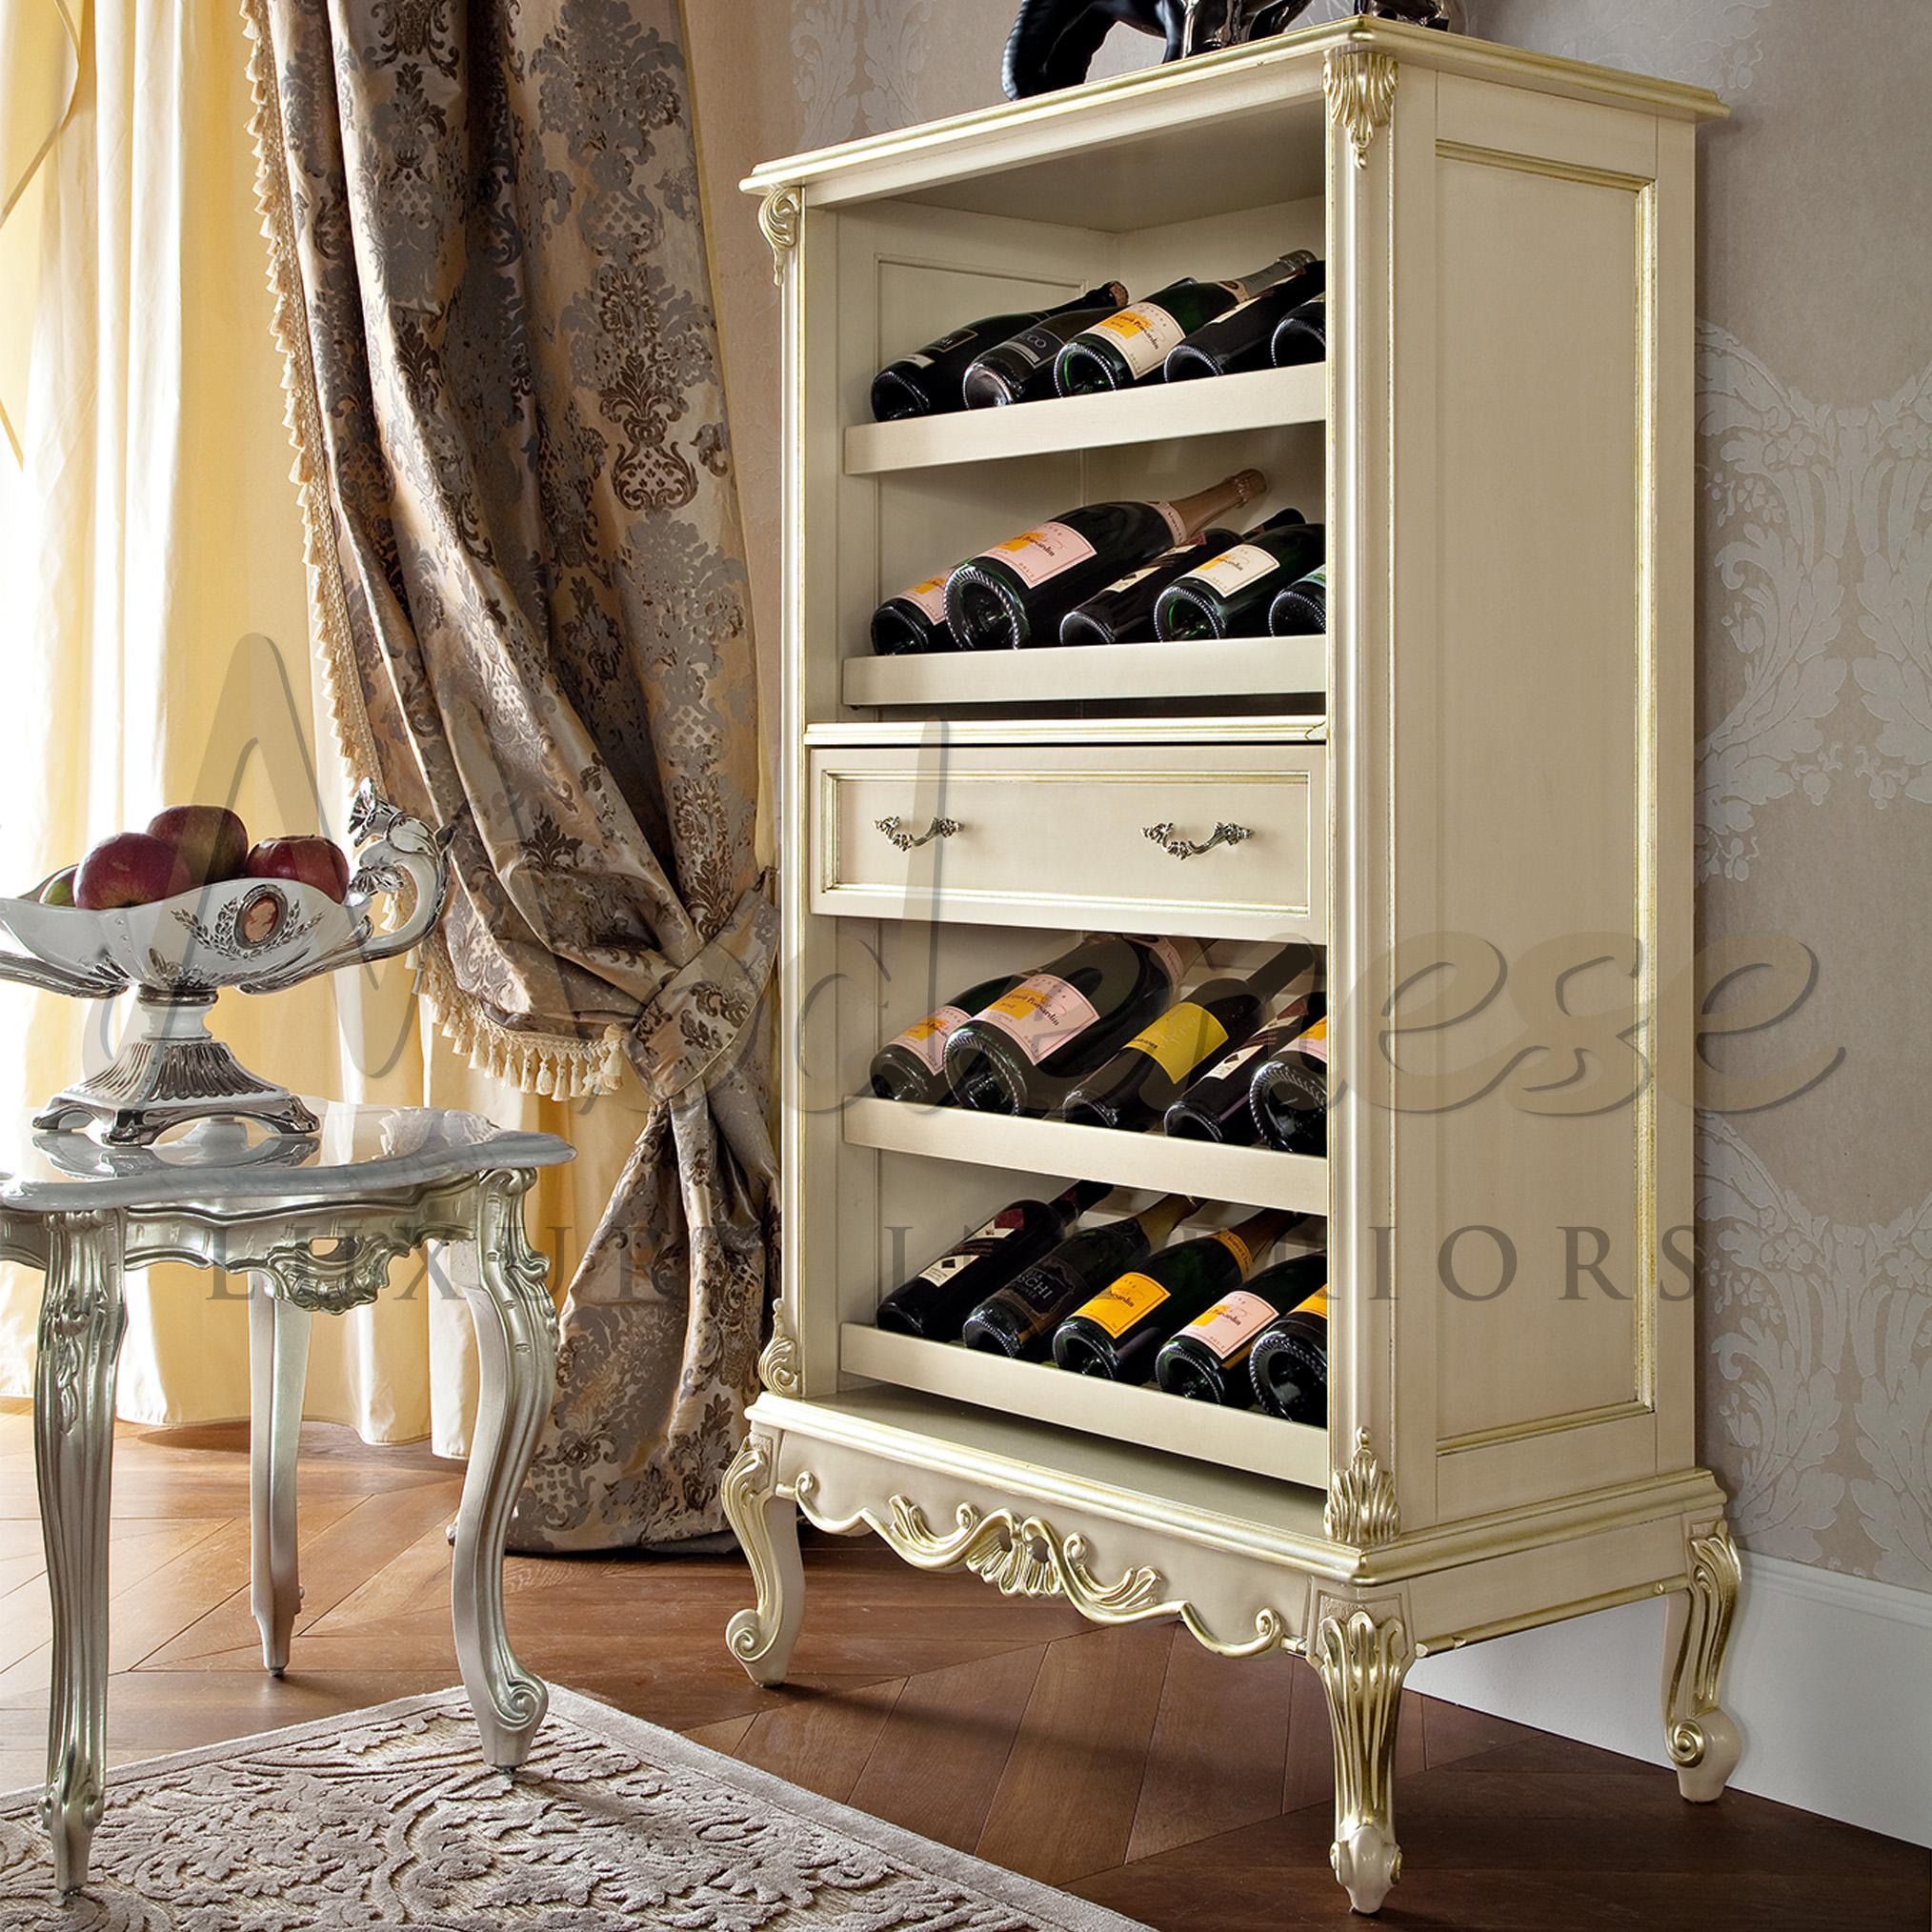 A lot more than just normal furniture, this bottle rack features one drawer and four shelves capable of holdingat least 30 bottles. Its ivory wood colour is given by a lacquered finish and baroque carved decorations are totally